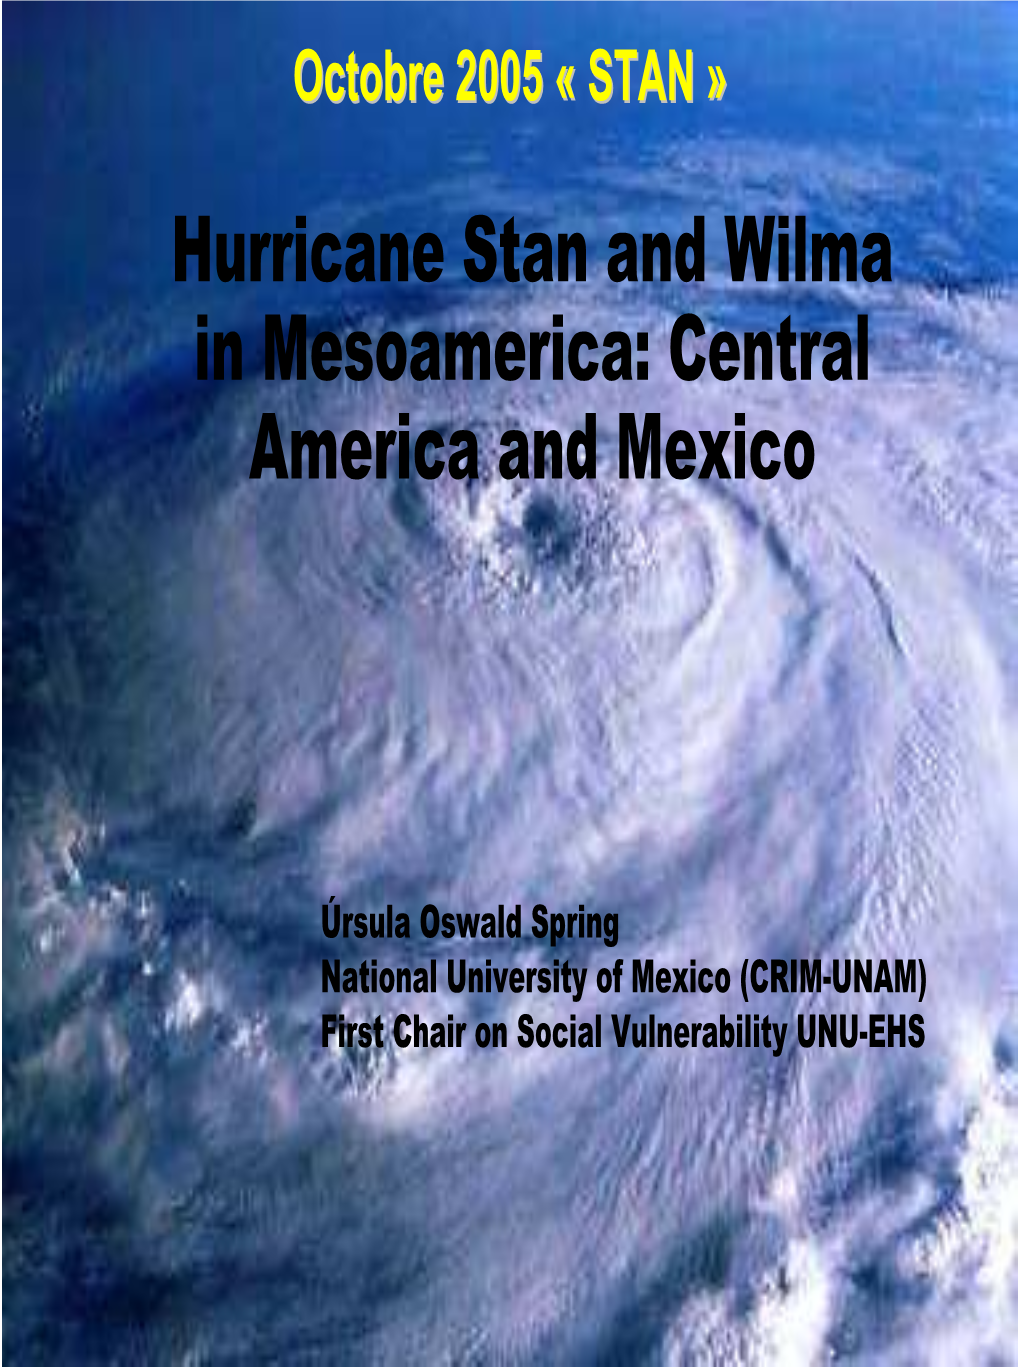 Hurricane Stan and Wilma in Mesoamerica: Central America and Mexico